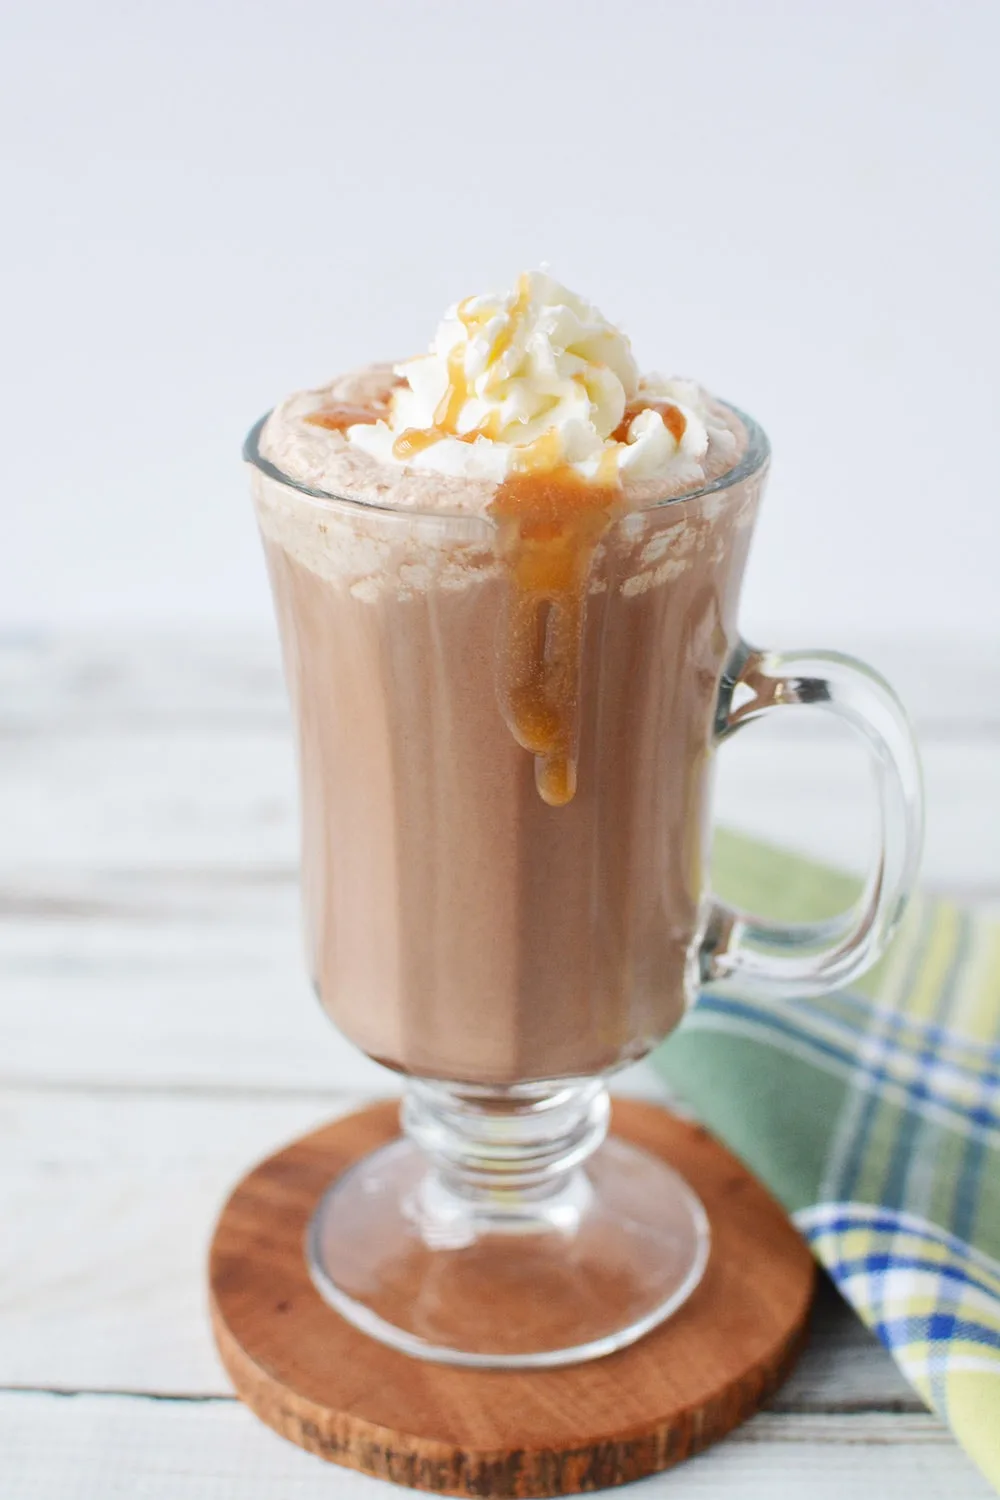 Salted caramel mocha in a glass with caramel dripping down sides.